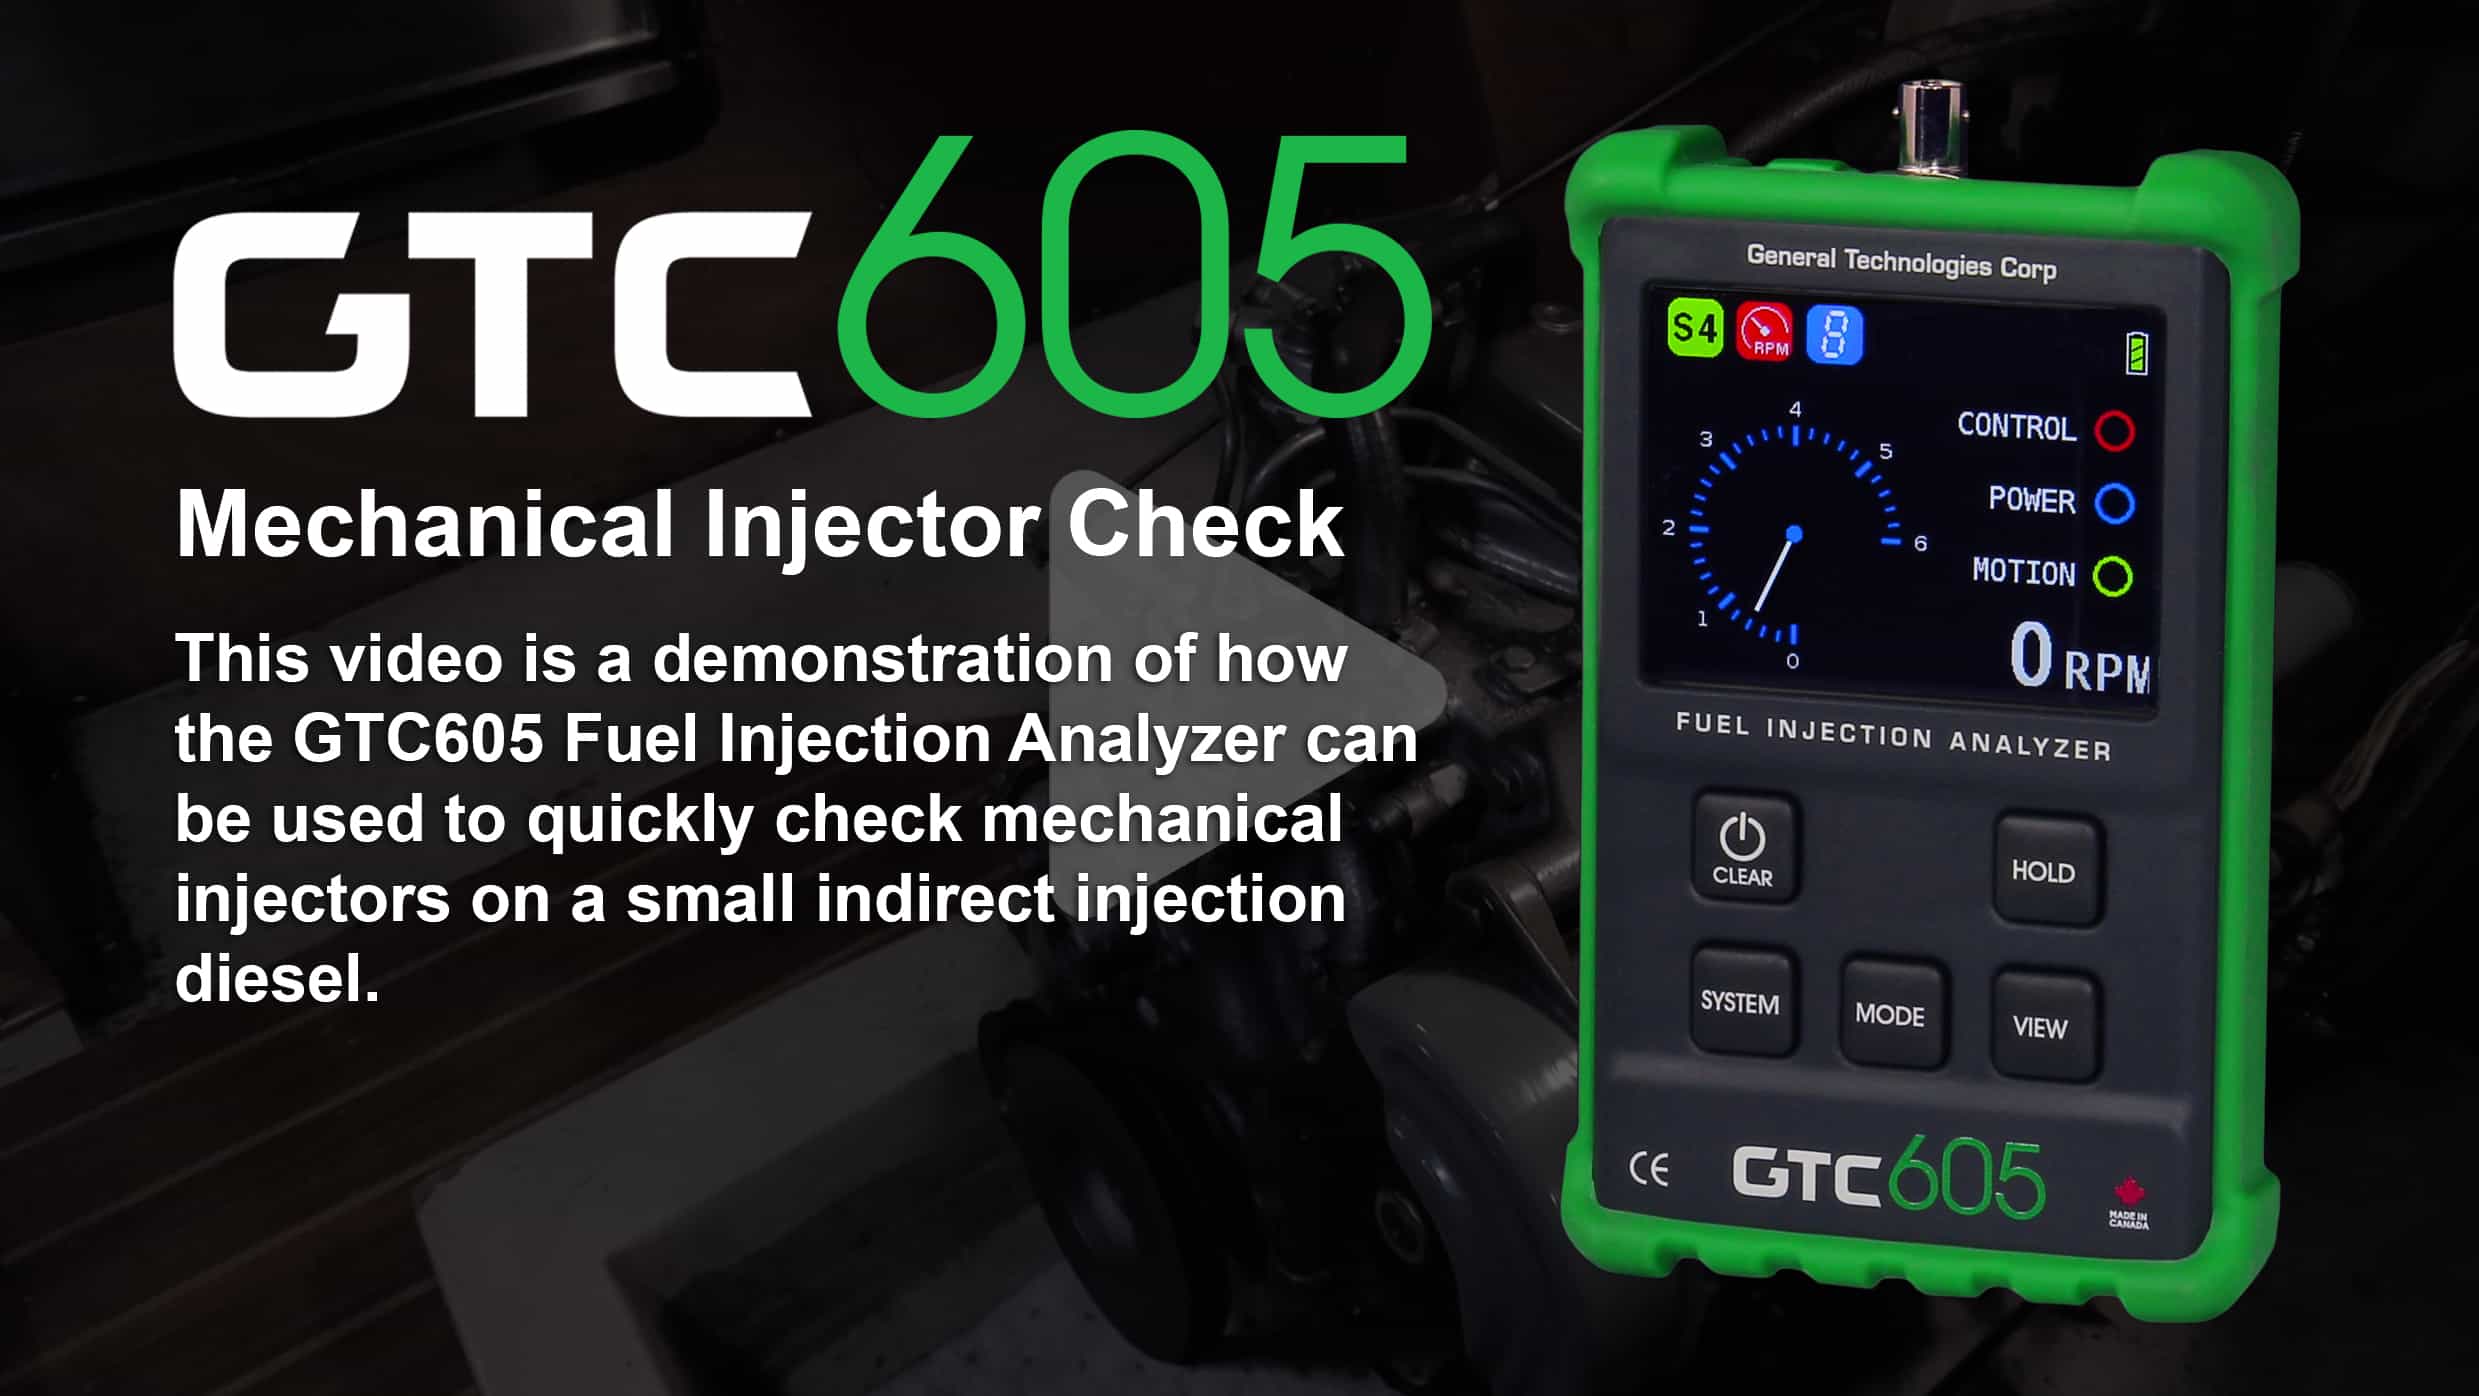 GTC605-Mechanical-Injector-Check-Title-Img